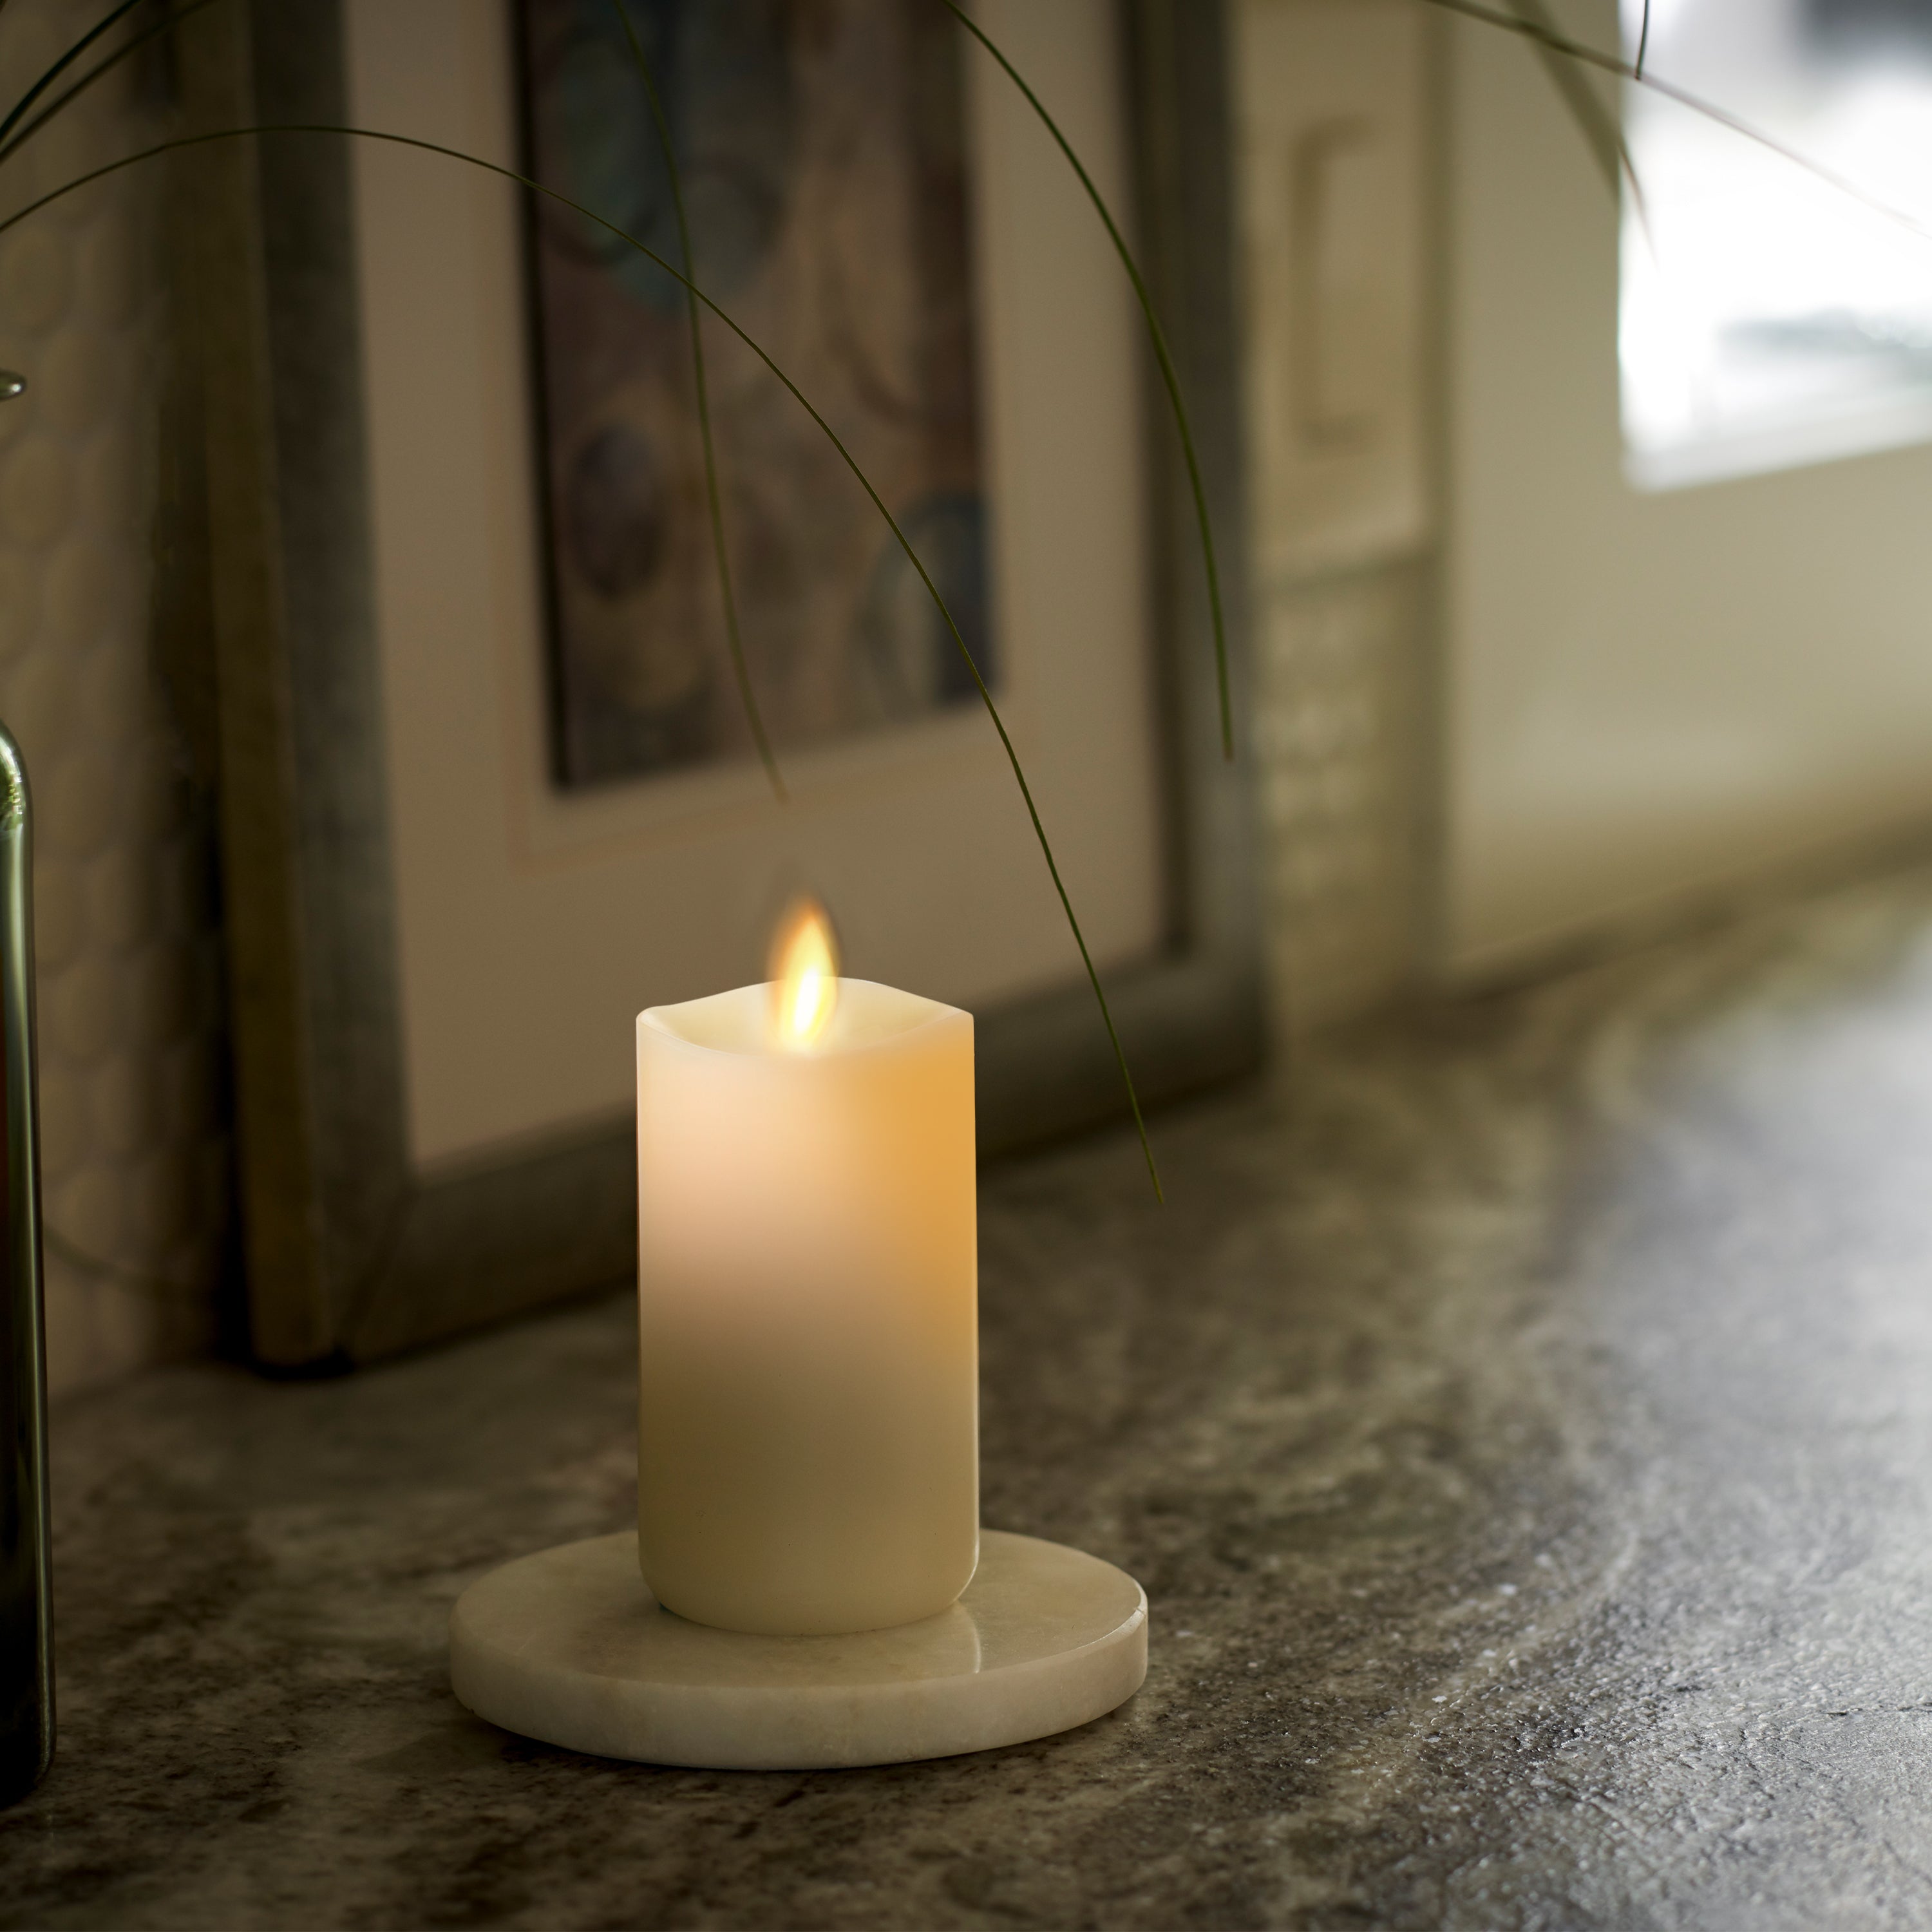 This indoor  2.0"x 4.25" flameless candle dances, flickers and sways so convincingly, you have to see it to believe it. Only Luminara flameless candles are born from patented technology, which means they are unrivaled as a safe way to bring more magic to any room.